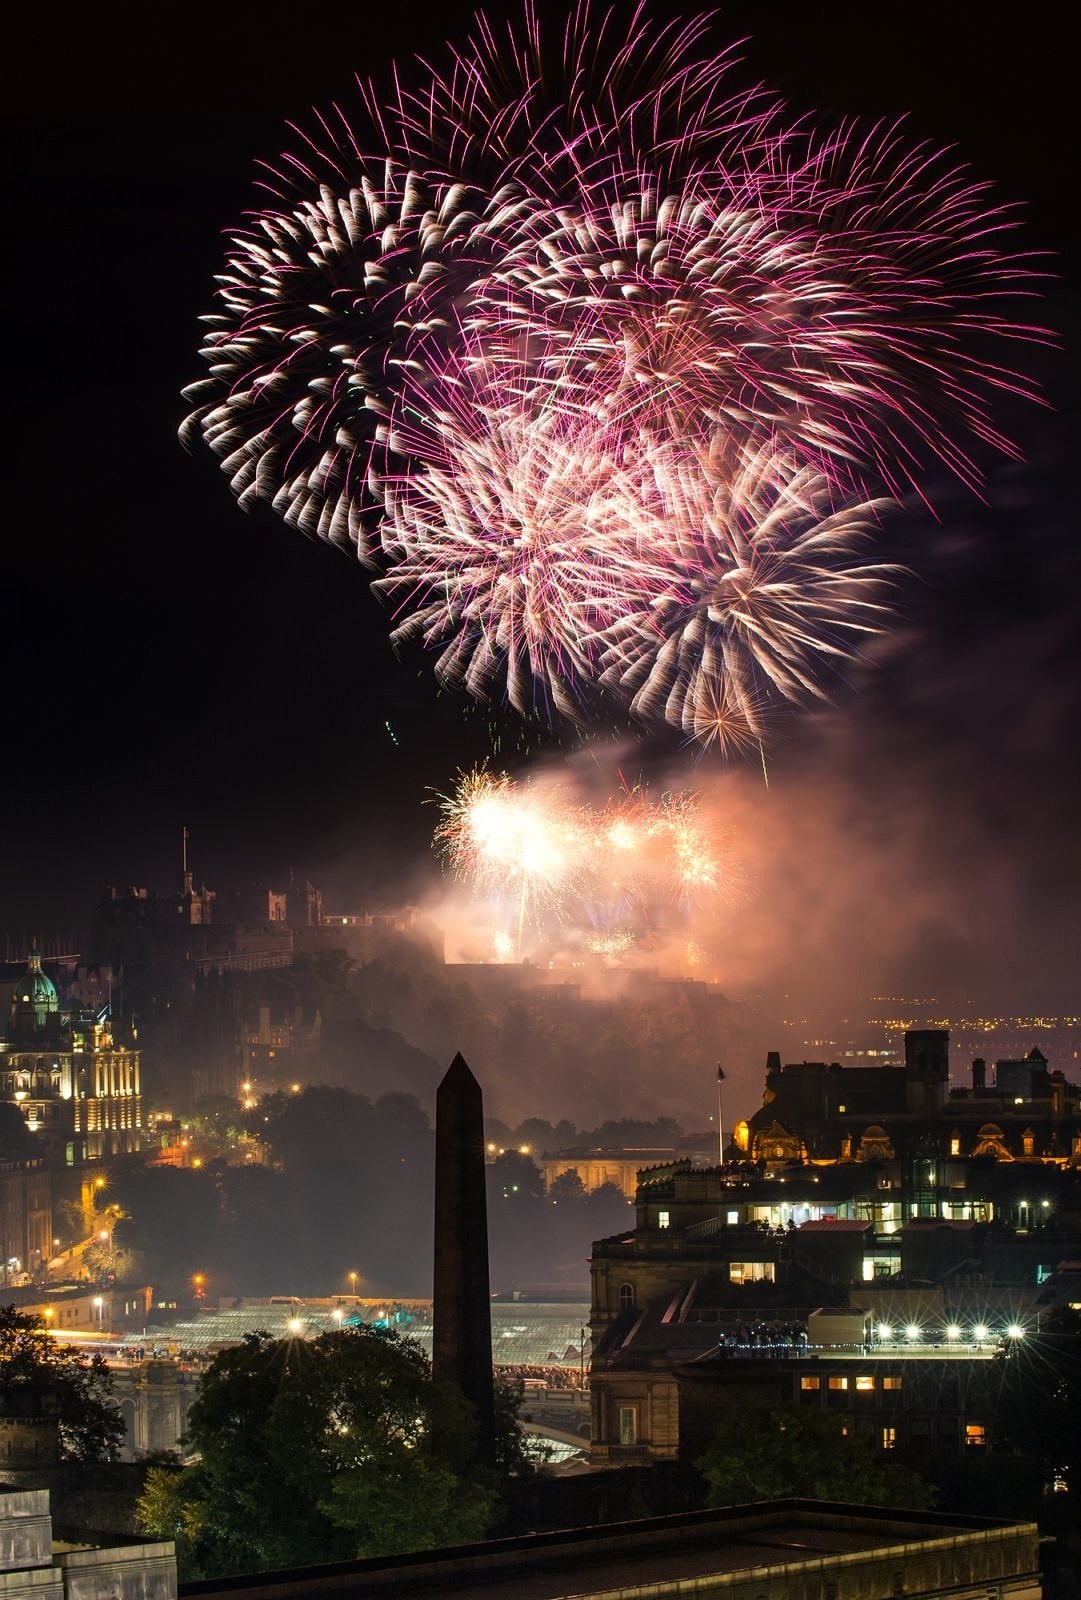 Fireworks over Edinburgh Castle ~ New Year's Eve Traditions from Europe